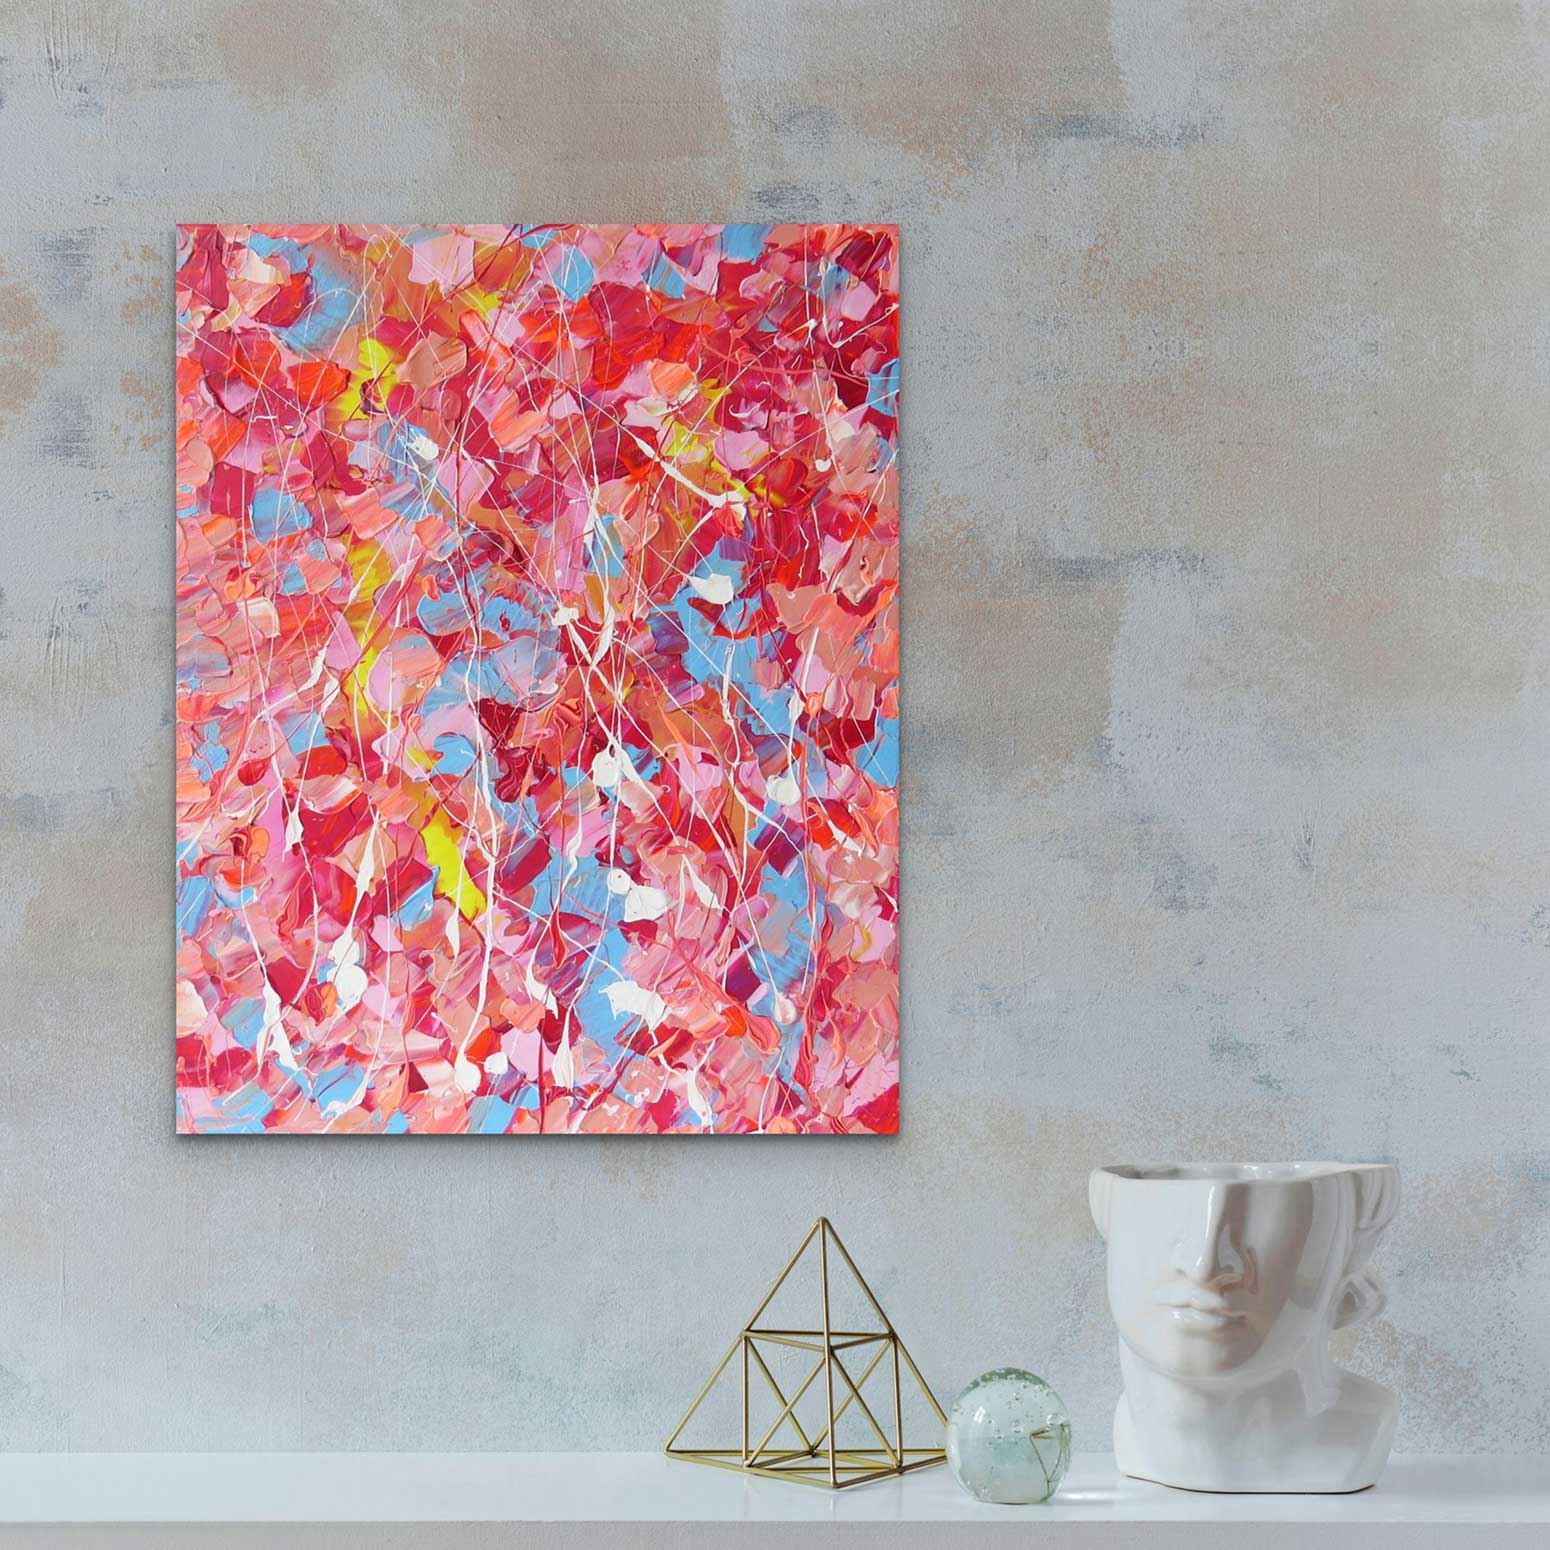 Pink Lake, textured abstract painting, pinks, nudes, reds, blue, yellow and white palette. Seen in situ against concrete wall with modern decor.